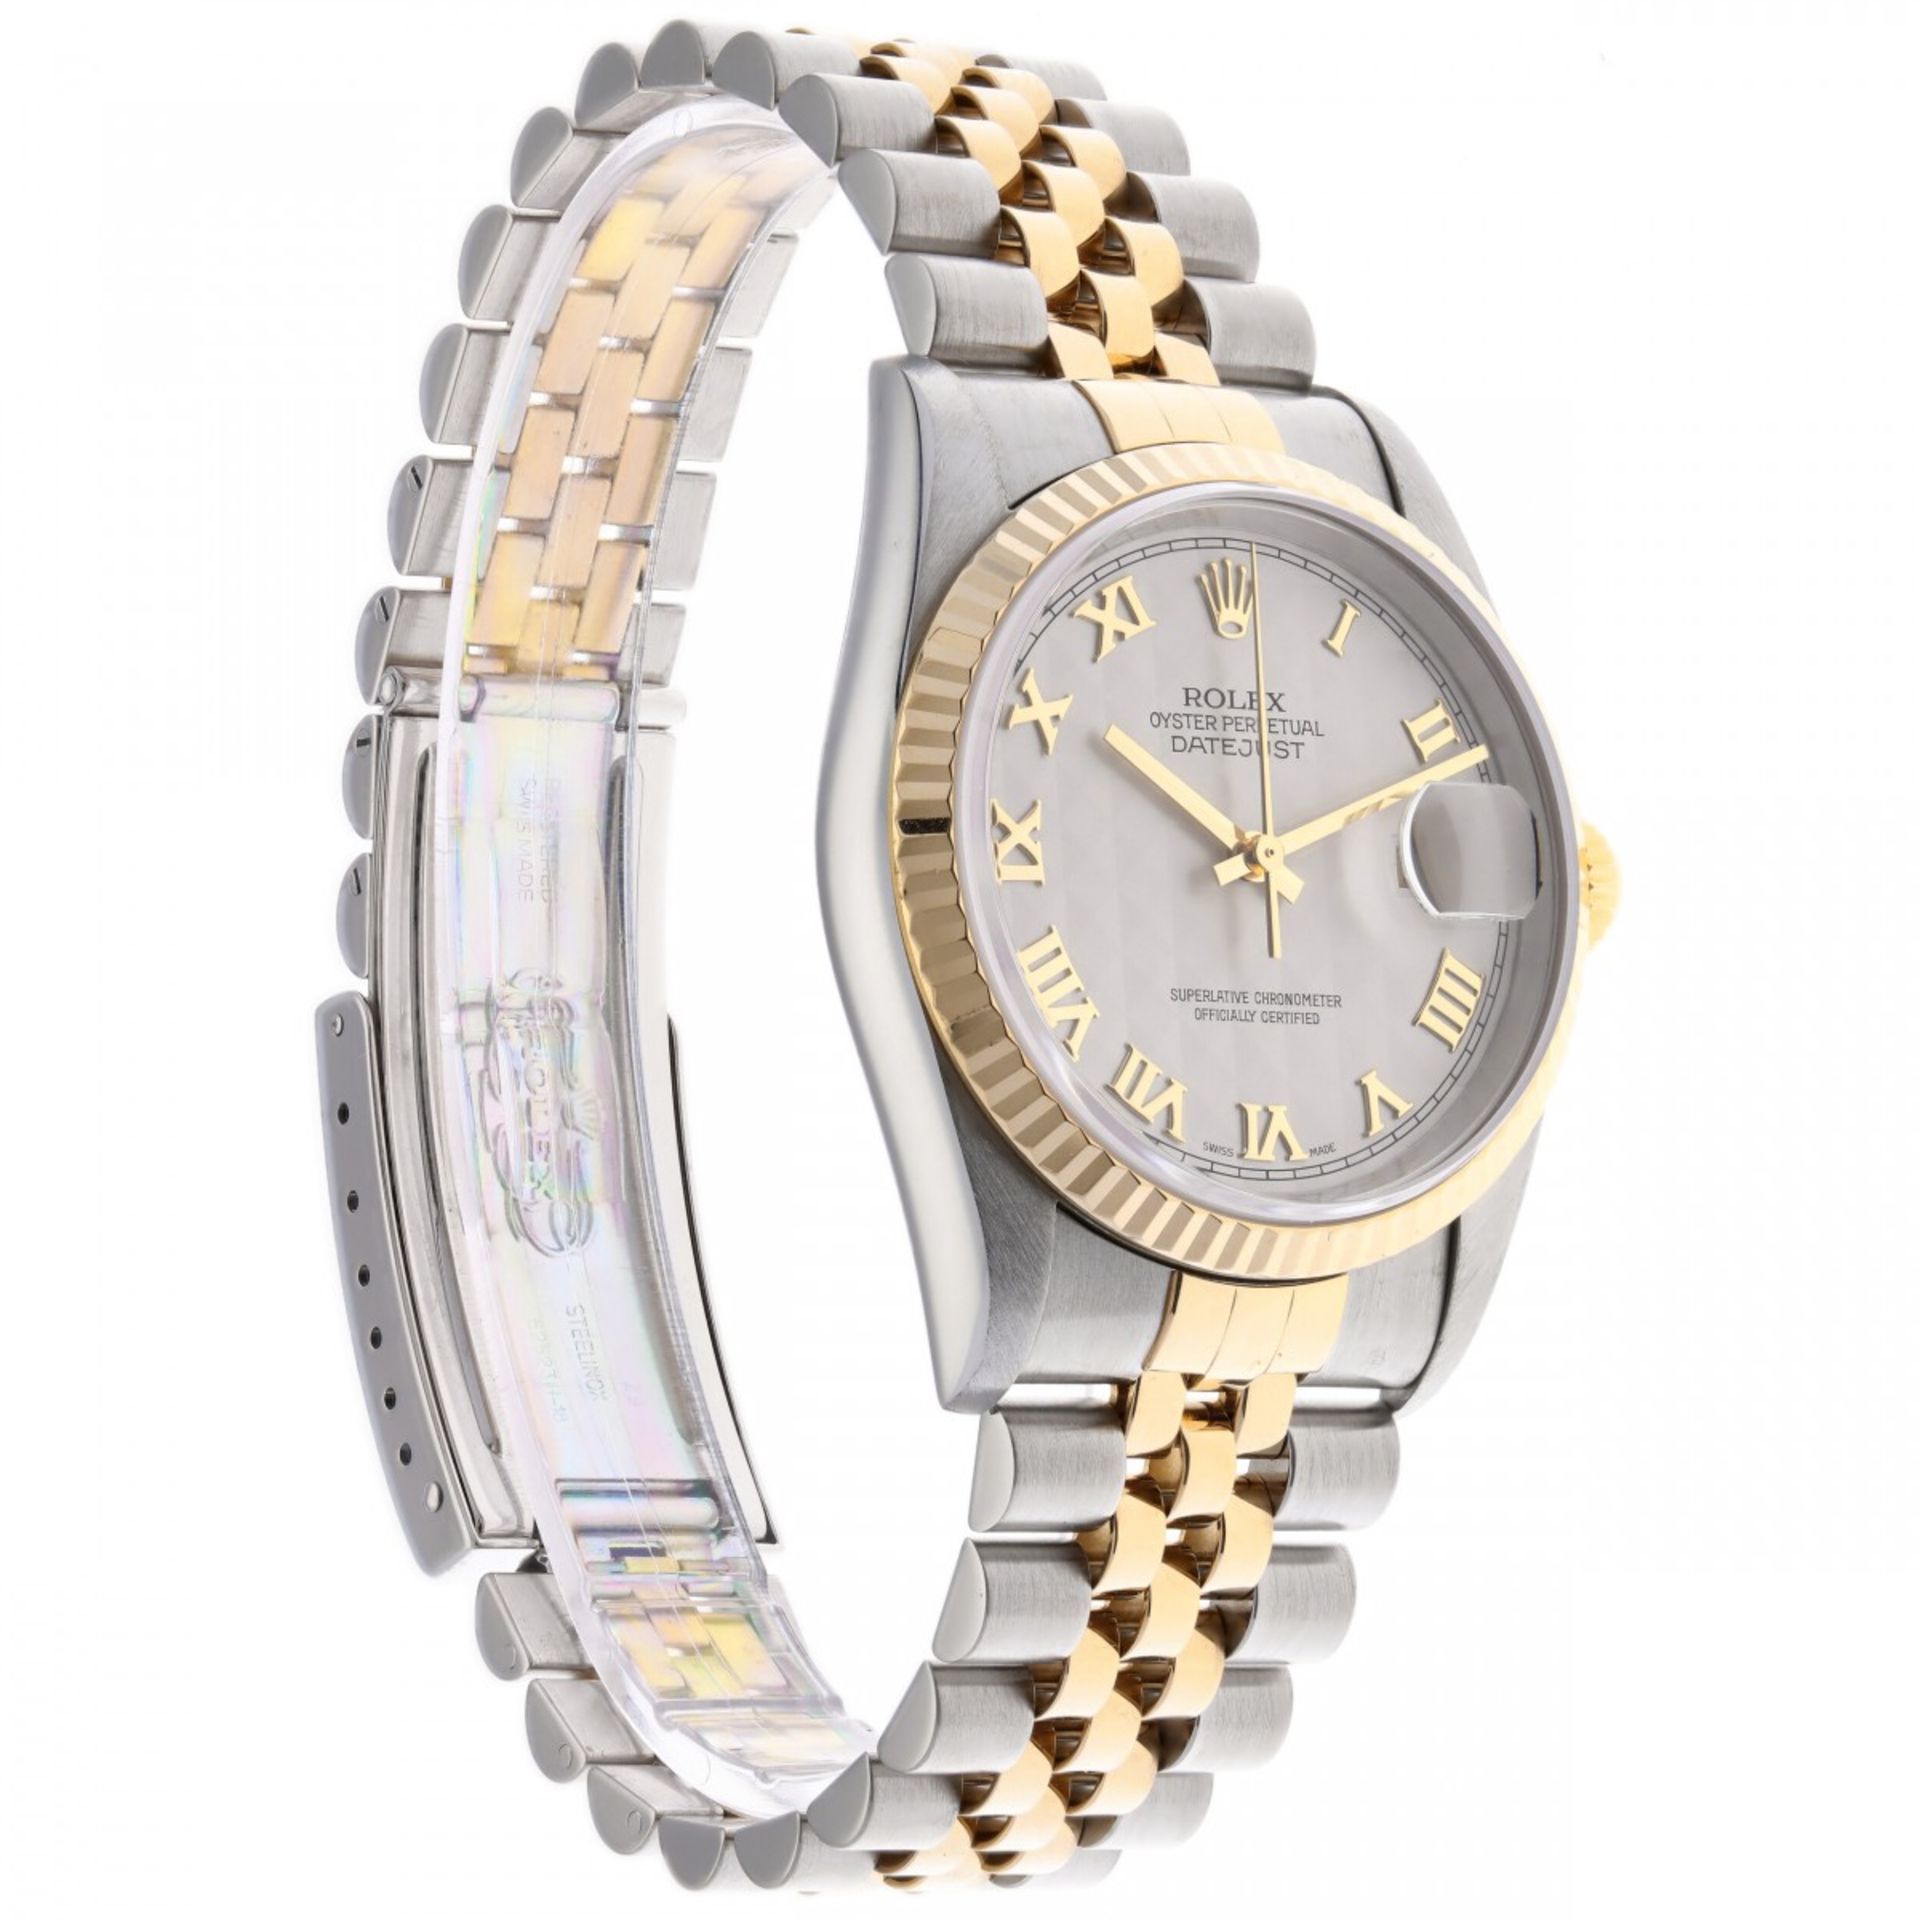 Rolex DateJust 16233 Pyramid Dial - Men's watch - approx. 1999 - Image 2 of 9